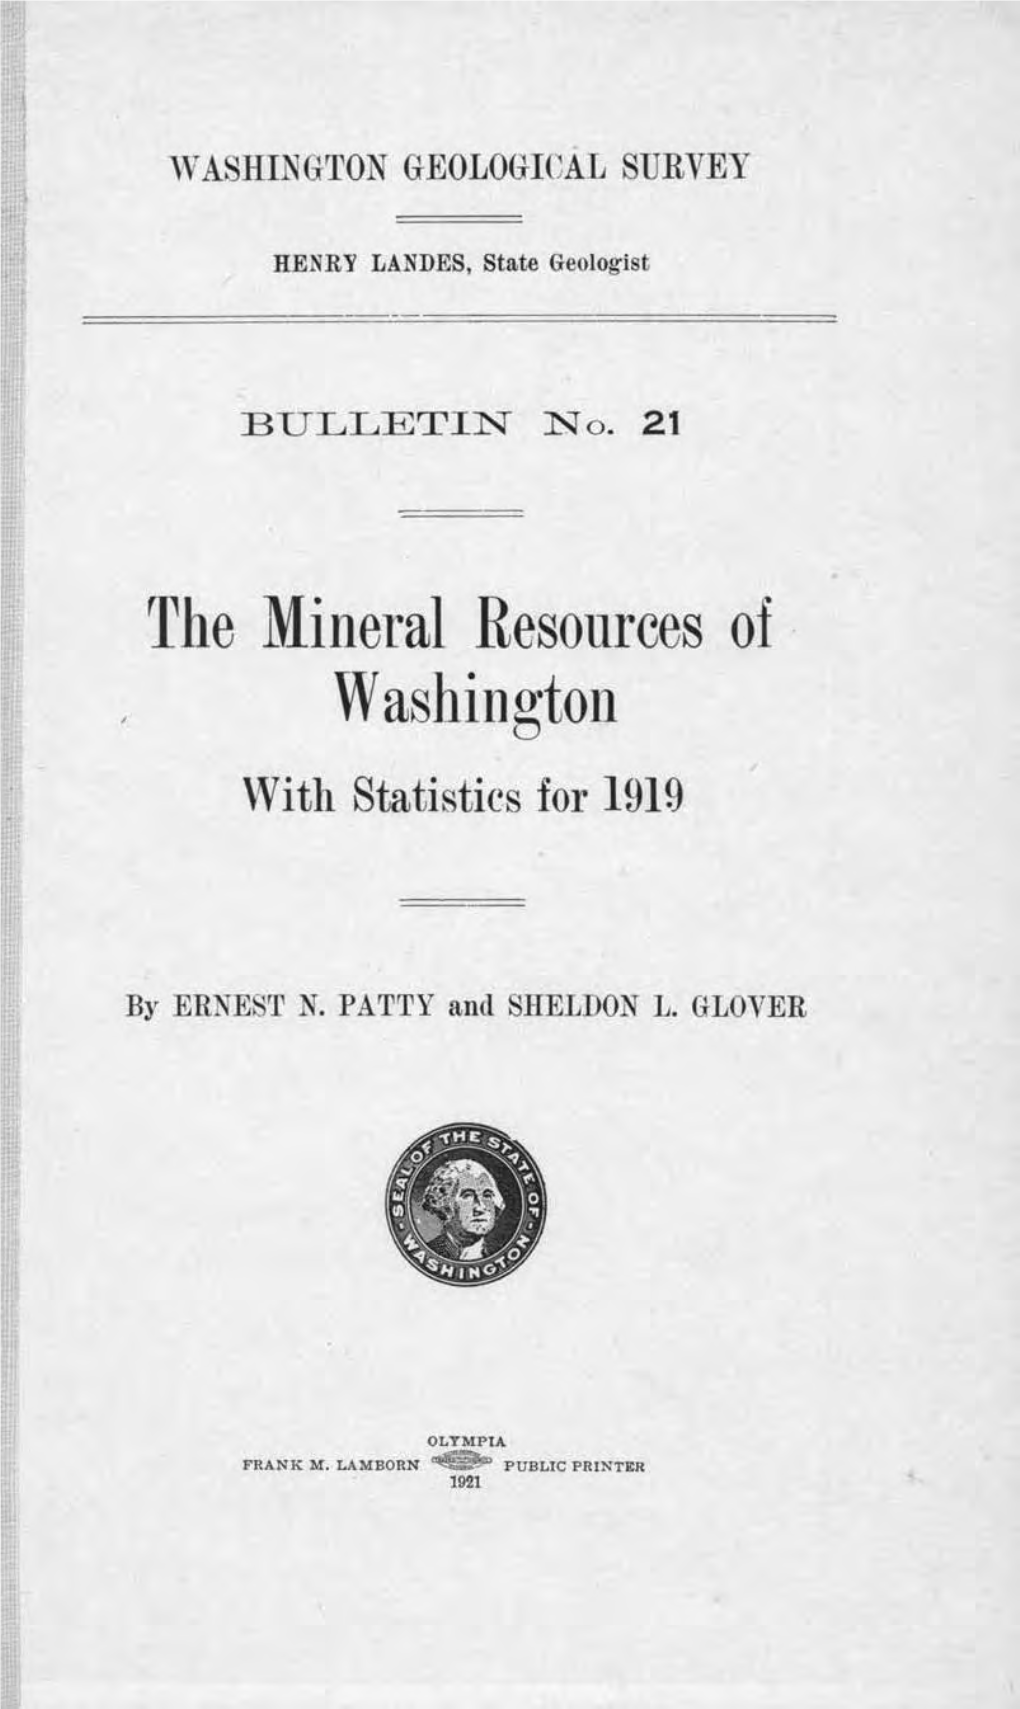 The Mineral Resources of Washington with Statistics for 1919